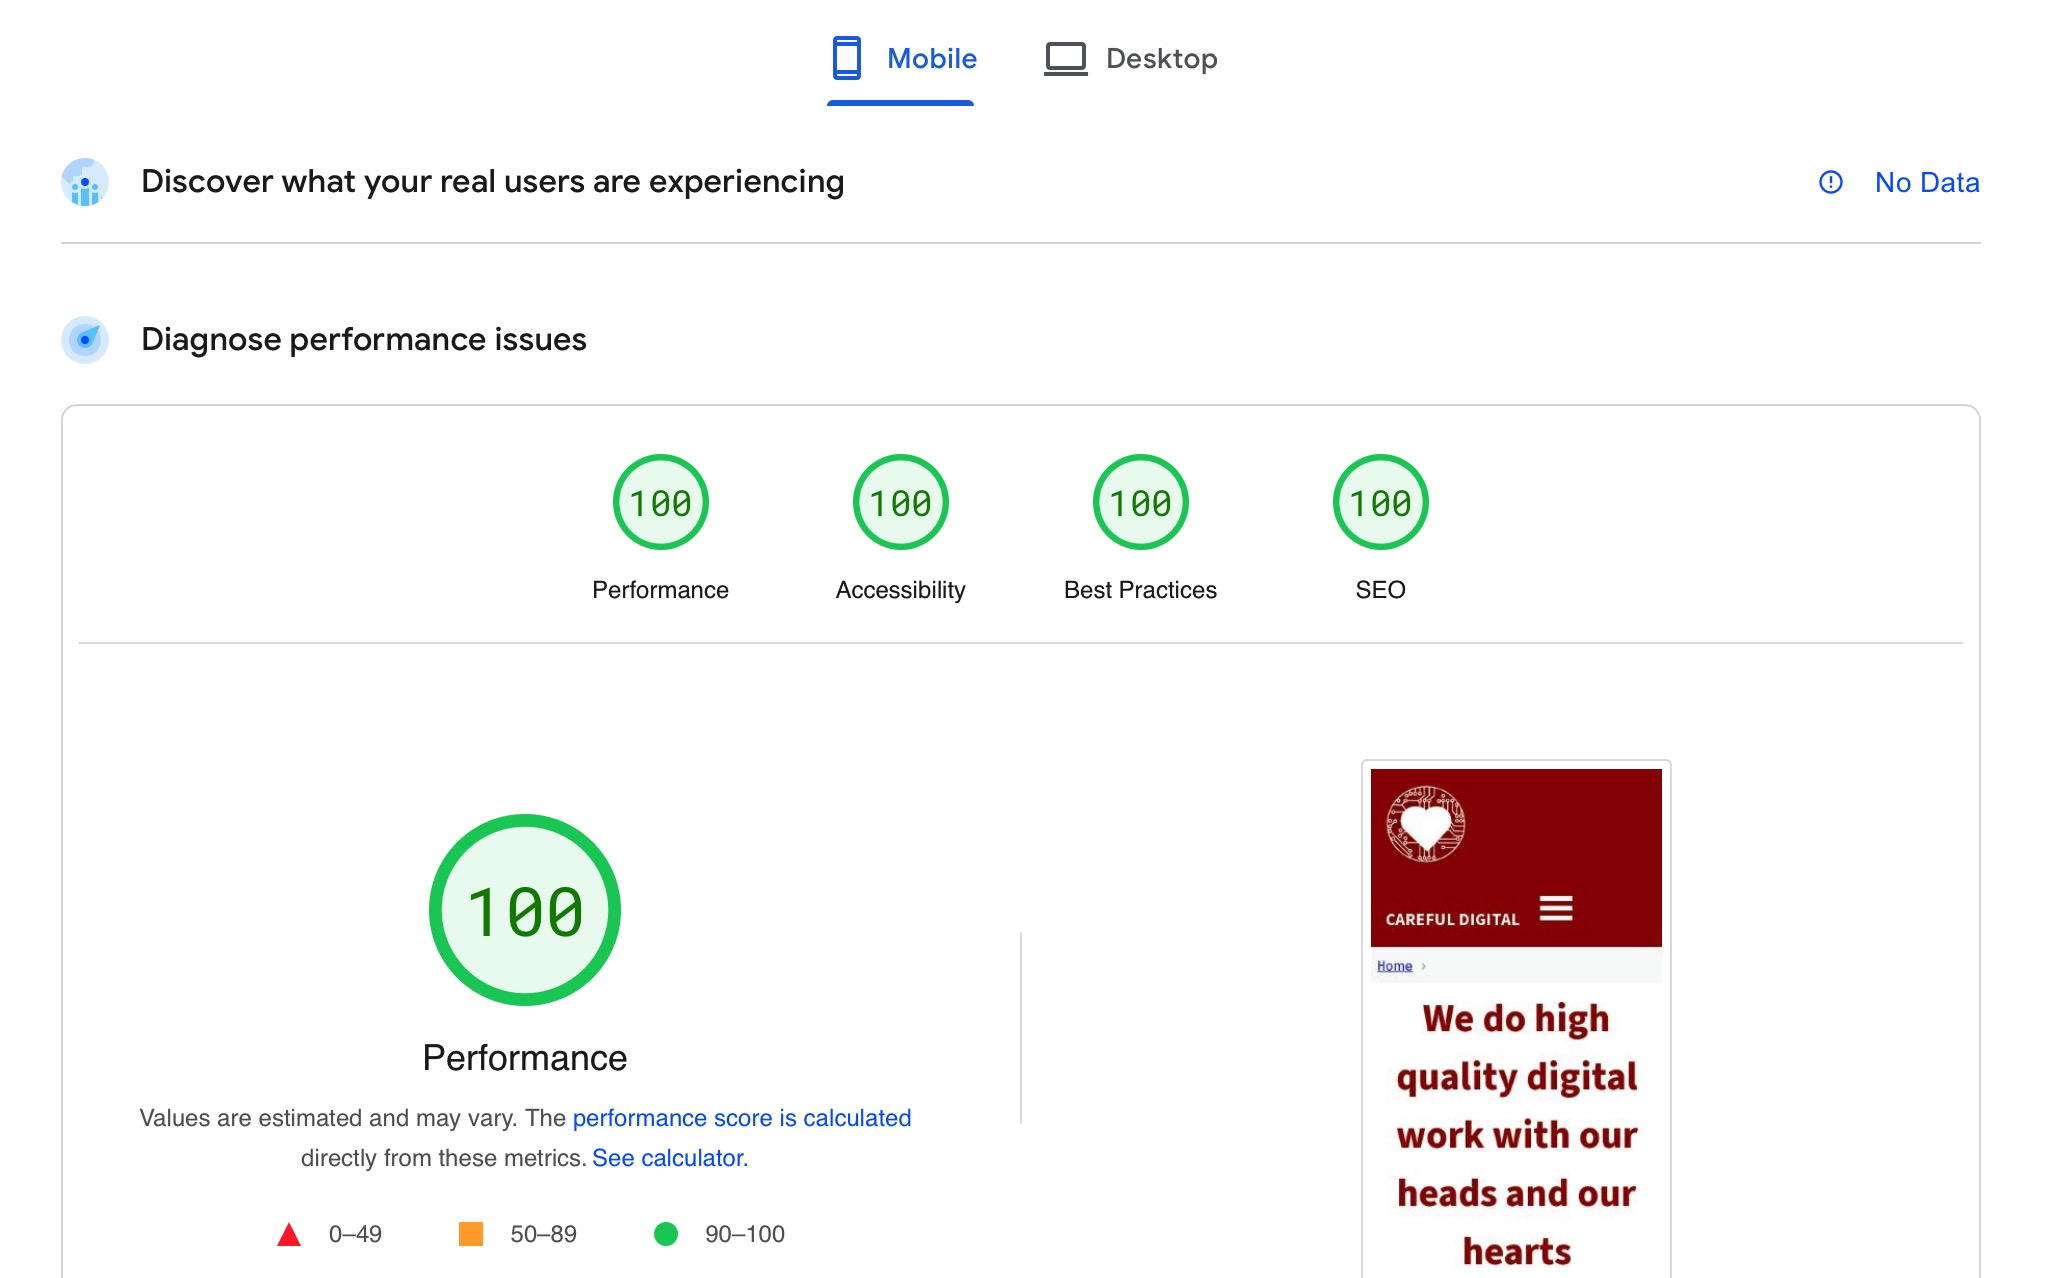 Core Web Vitals scores: 100/100 for Performance, Accessibility, Best Practices and SEO